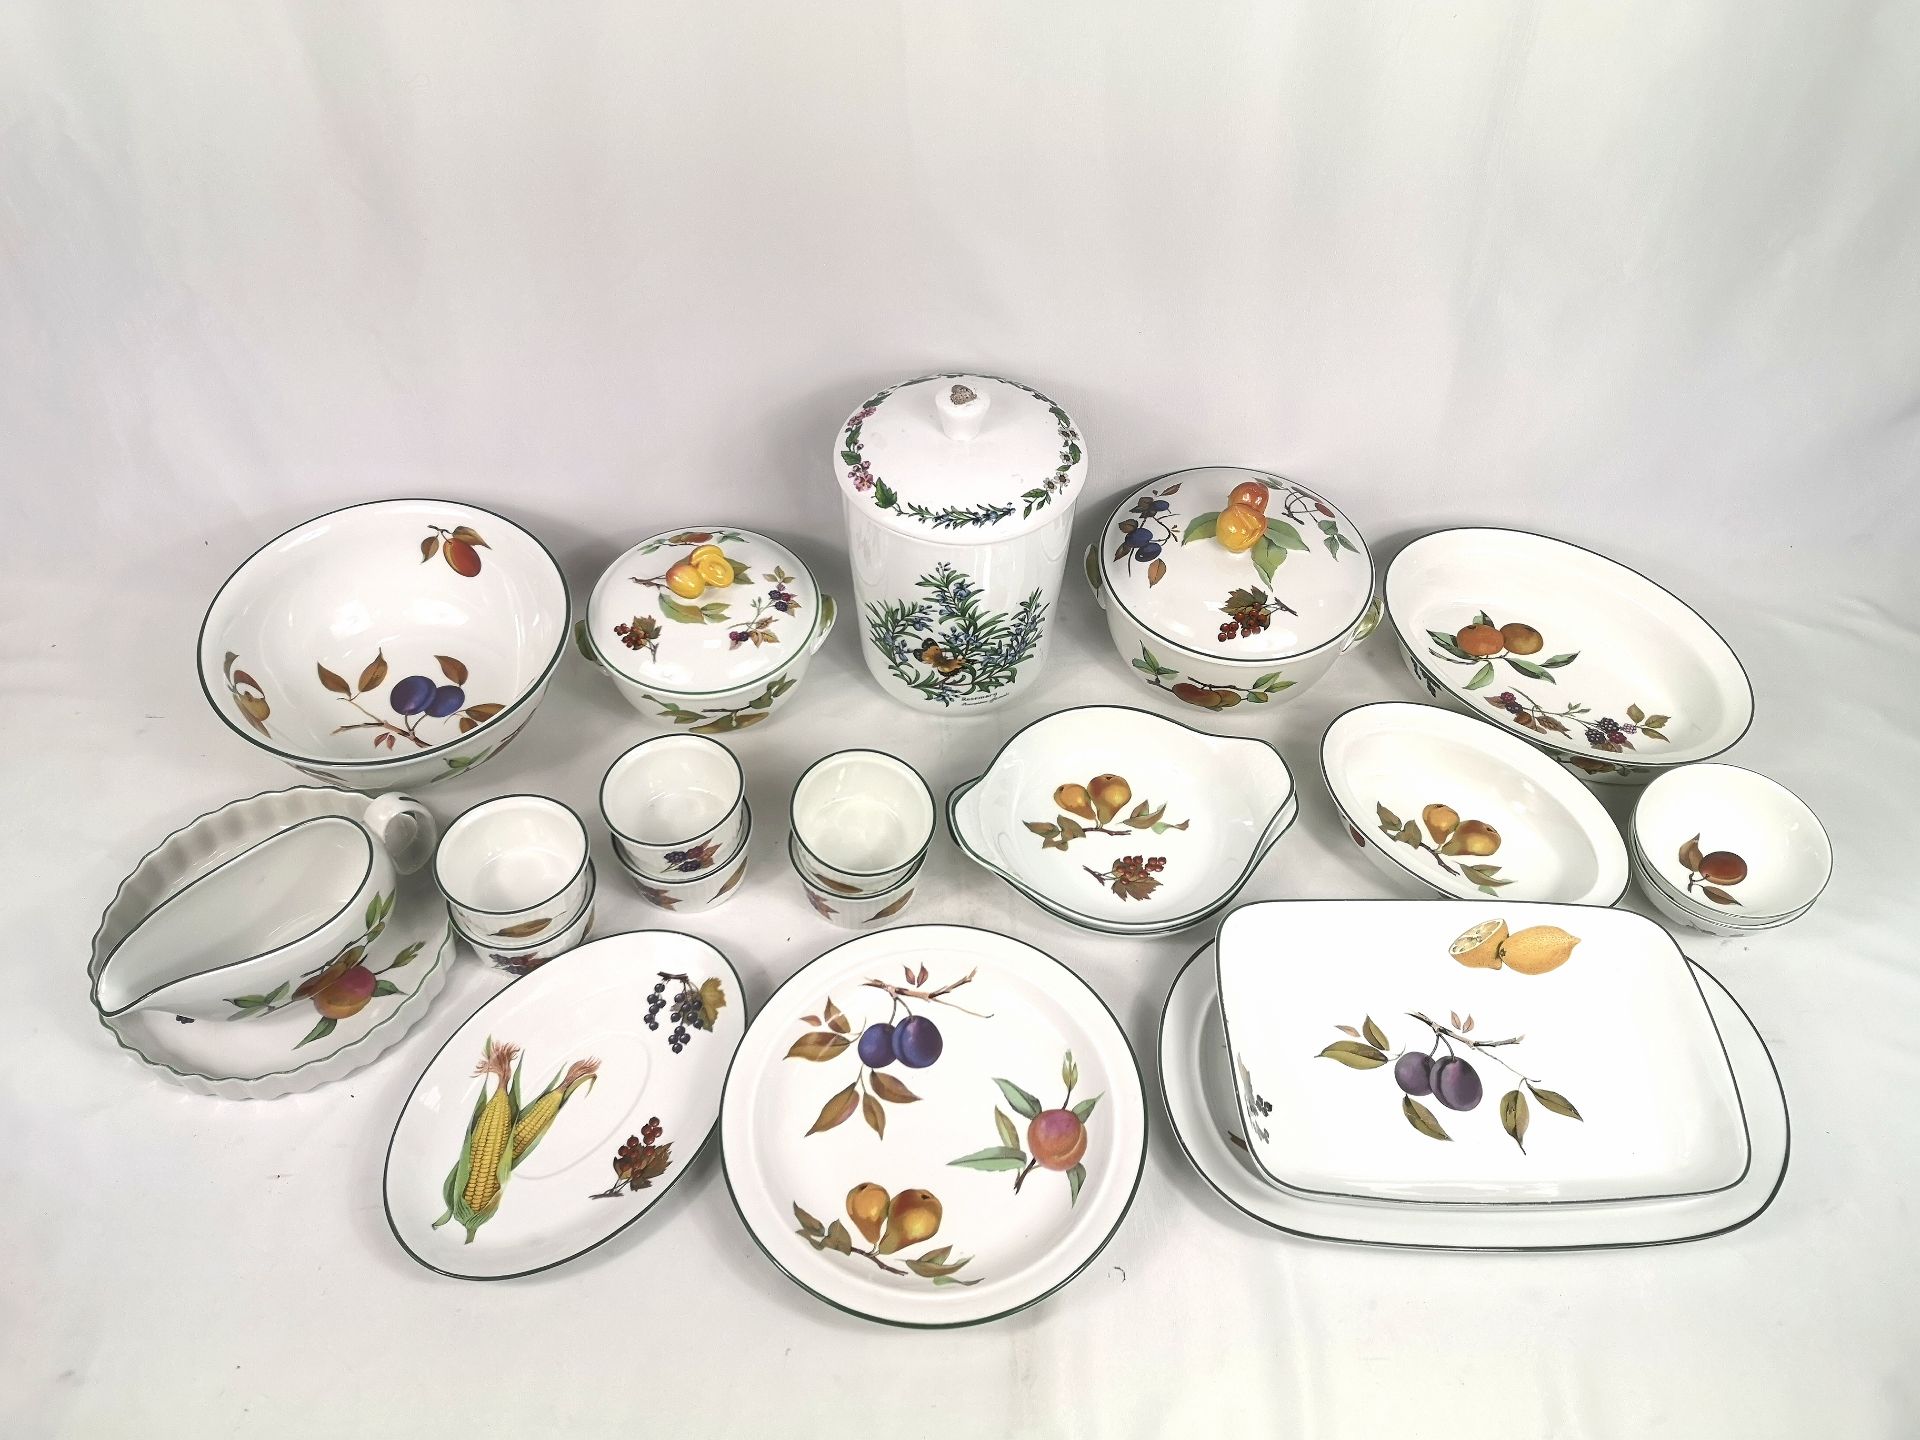 A quantity of Royal Worcester Evesham tableware